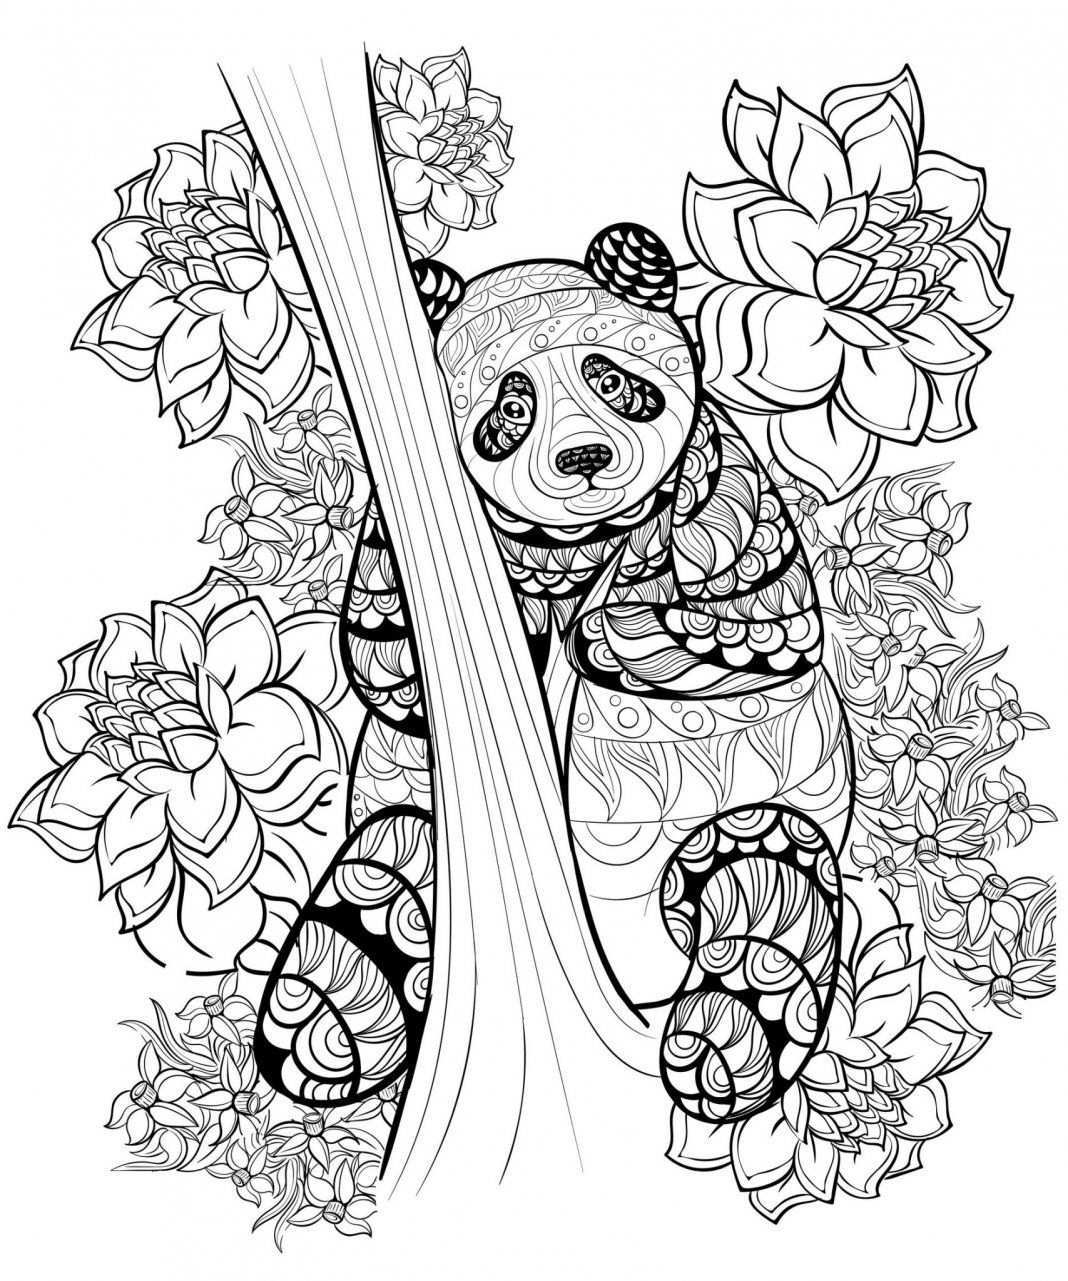 Abstrakcyjne Kolorowanki Dla Dzieci I Doroslych Panda Coloring Pages Animal Coloring Pages Coloring Pages For Teenagers